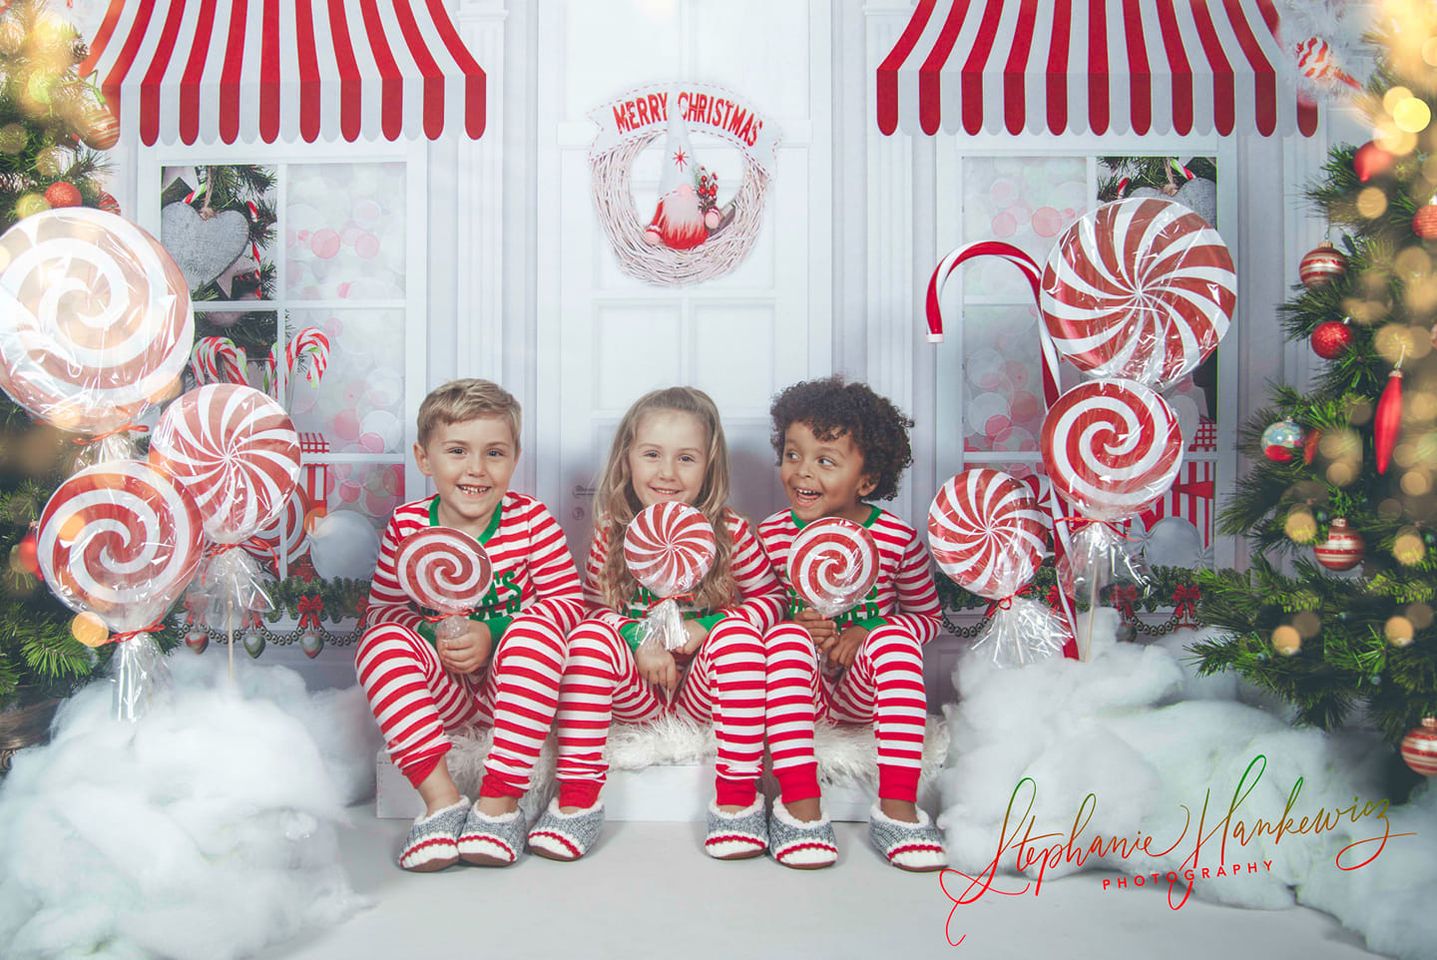 Kate Christmas Candy Shop Children Backdrop for Photography